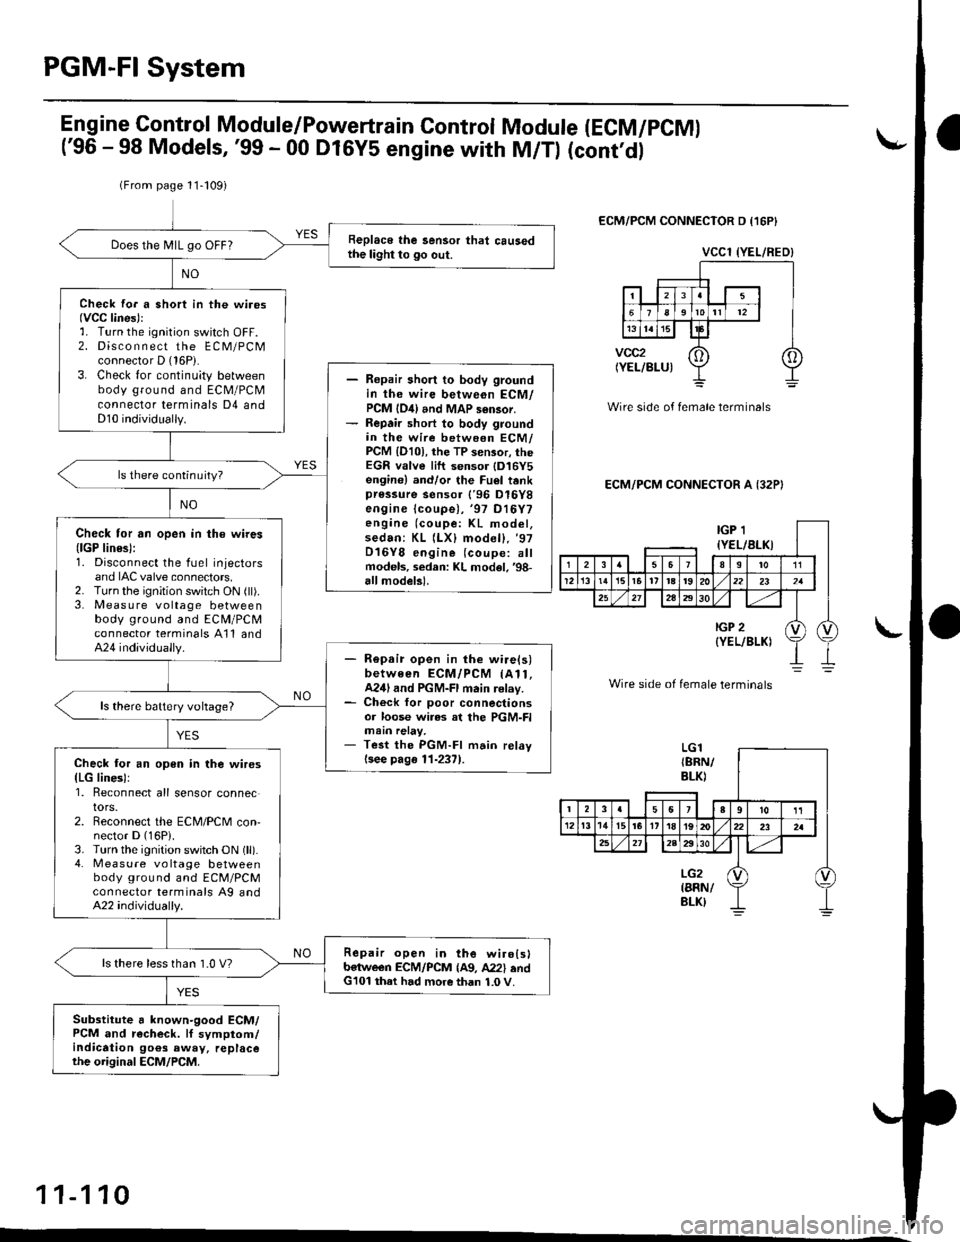 HONDA CIVIC 1996 6.G Workshop Manual PGM-FI System
(From page 11-109)
Replace the sensor that causedthe light to go out.Does the N4lL go OFF?
Check fo. a short in the wi.os(VCC lines)::. Turn the ignition switch OFF.2. Disco n n ect the